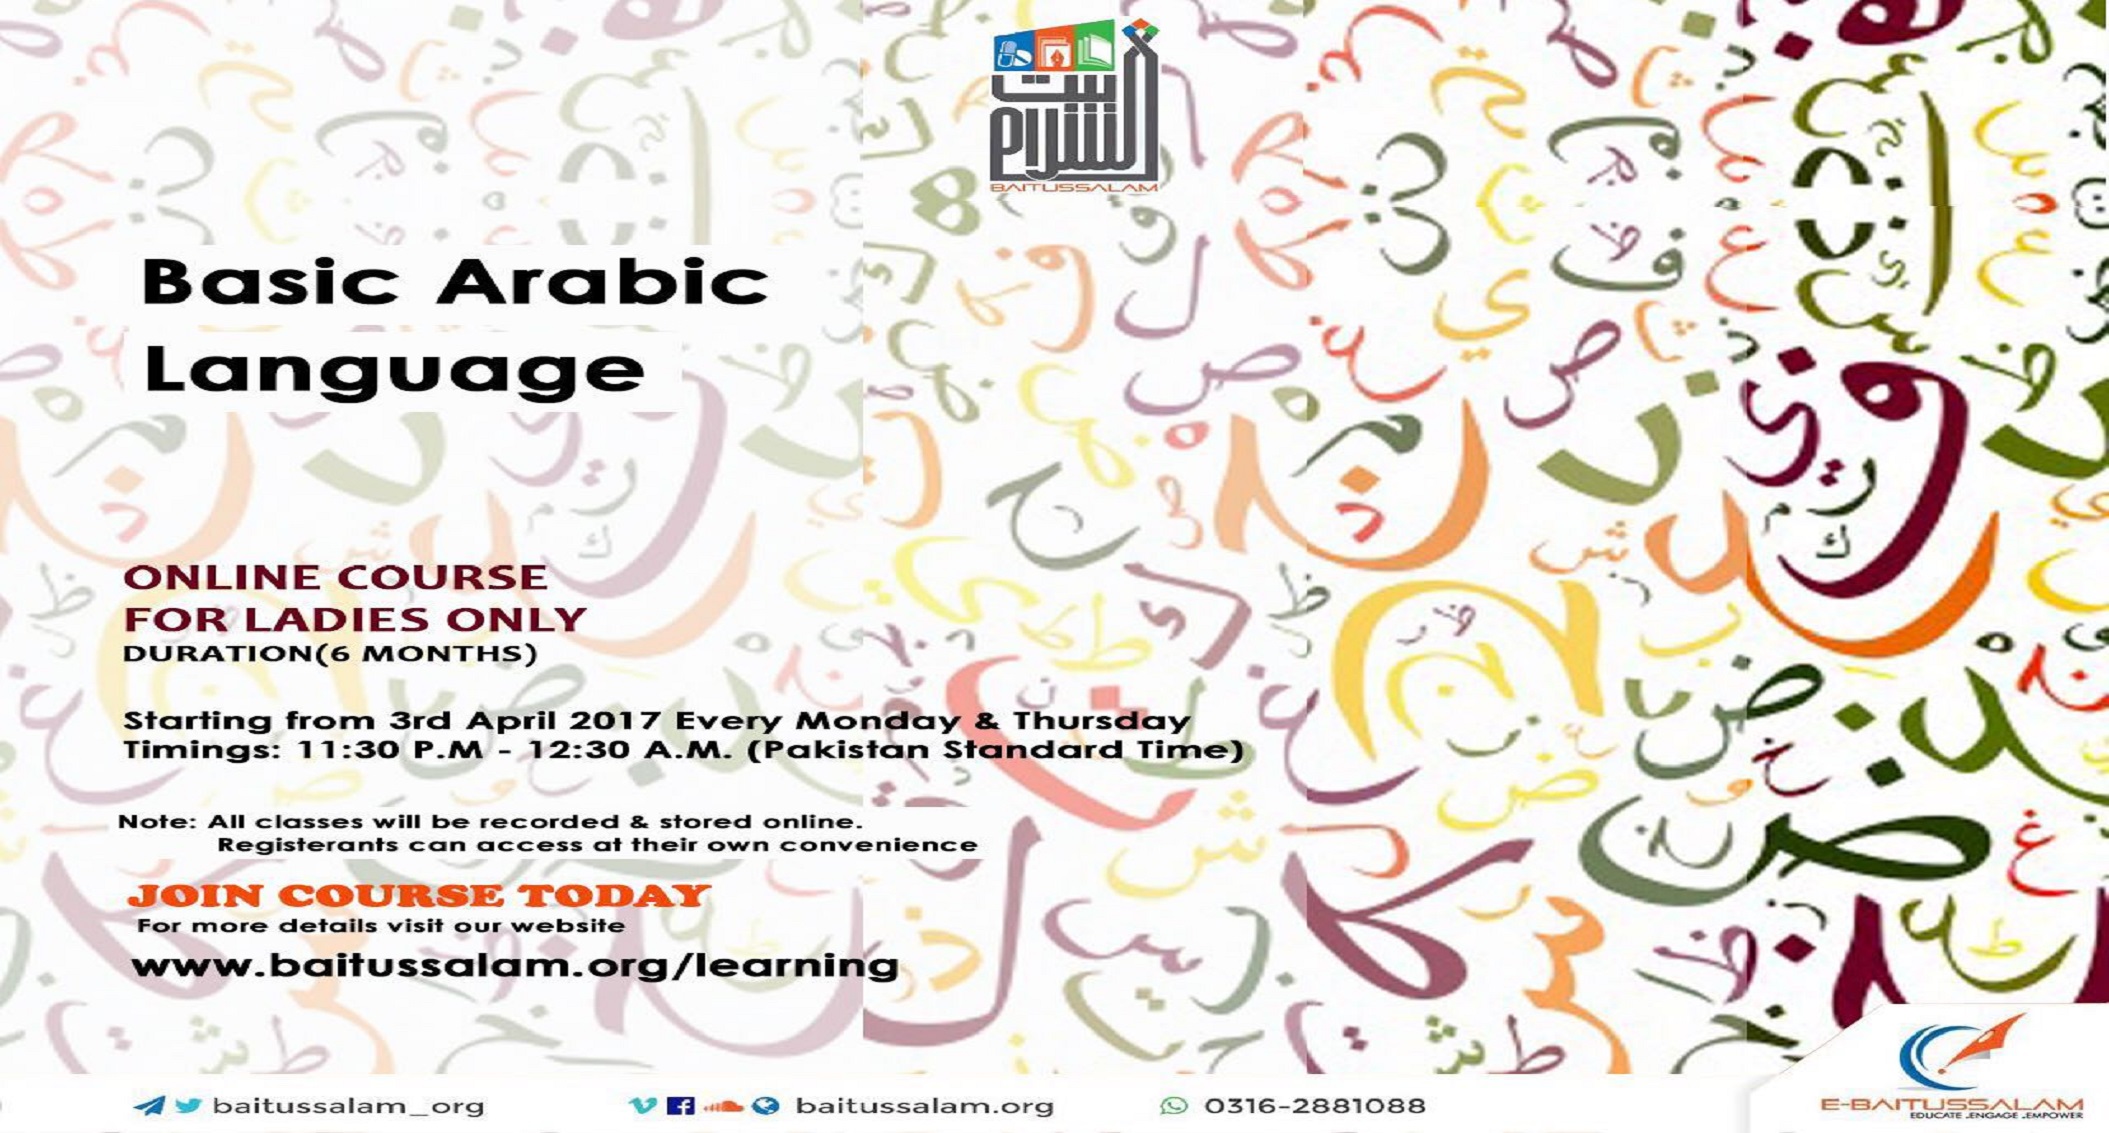 Arabic Language Course - For Women, Starting 3rd April 2017